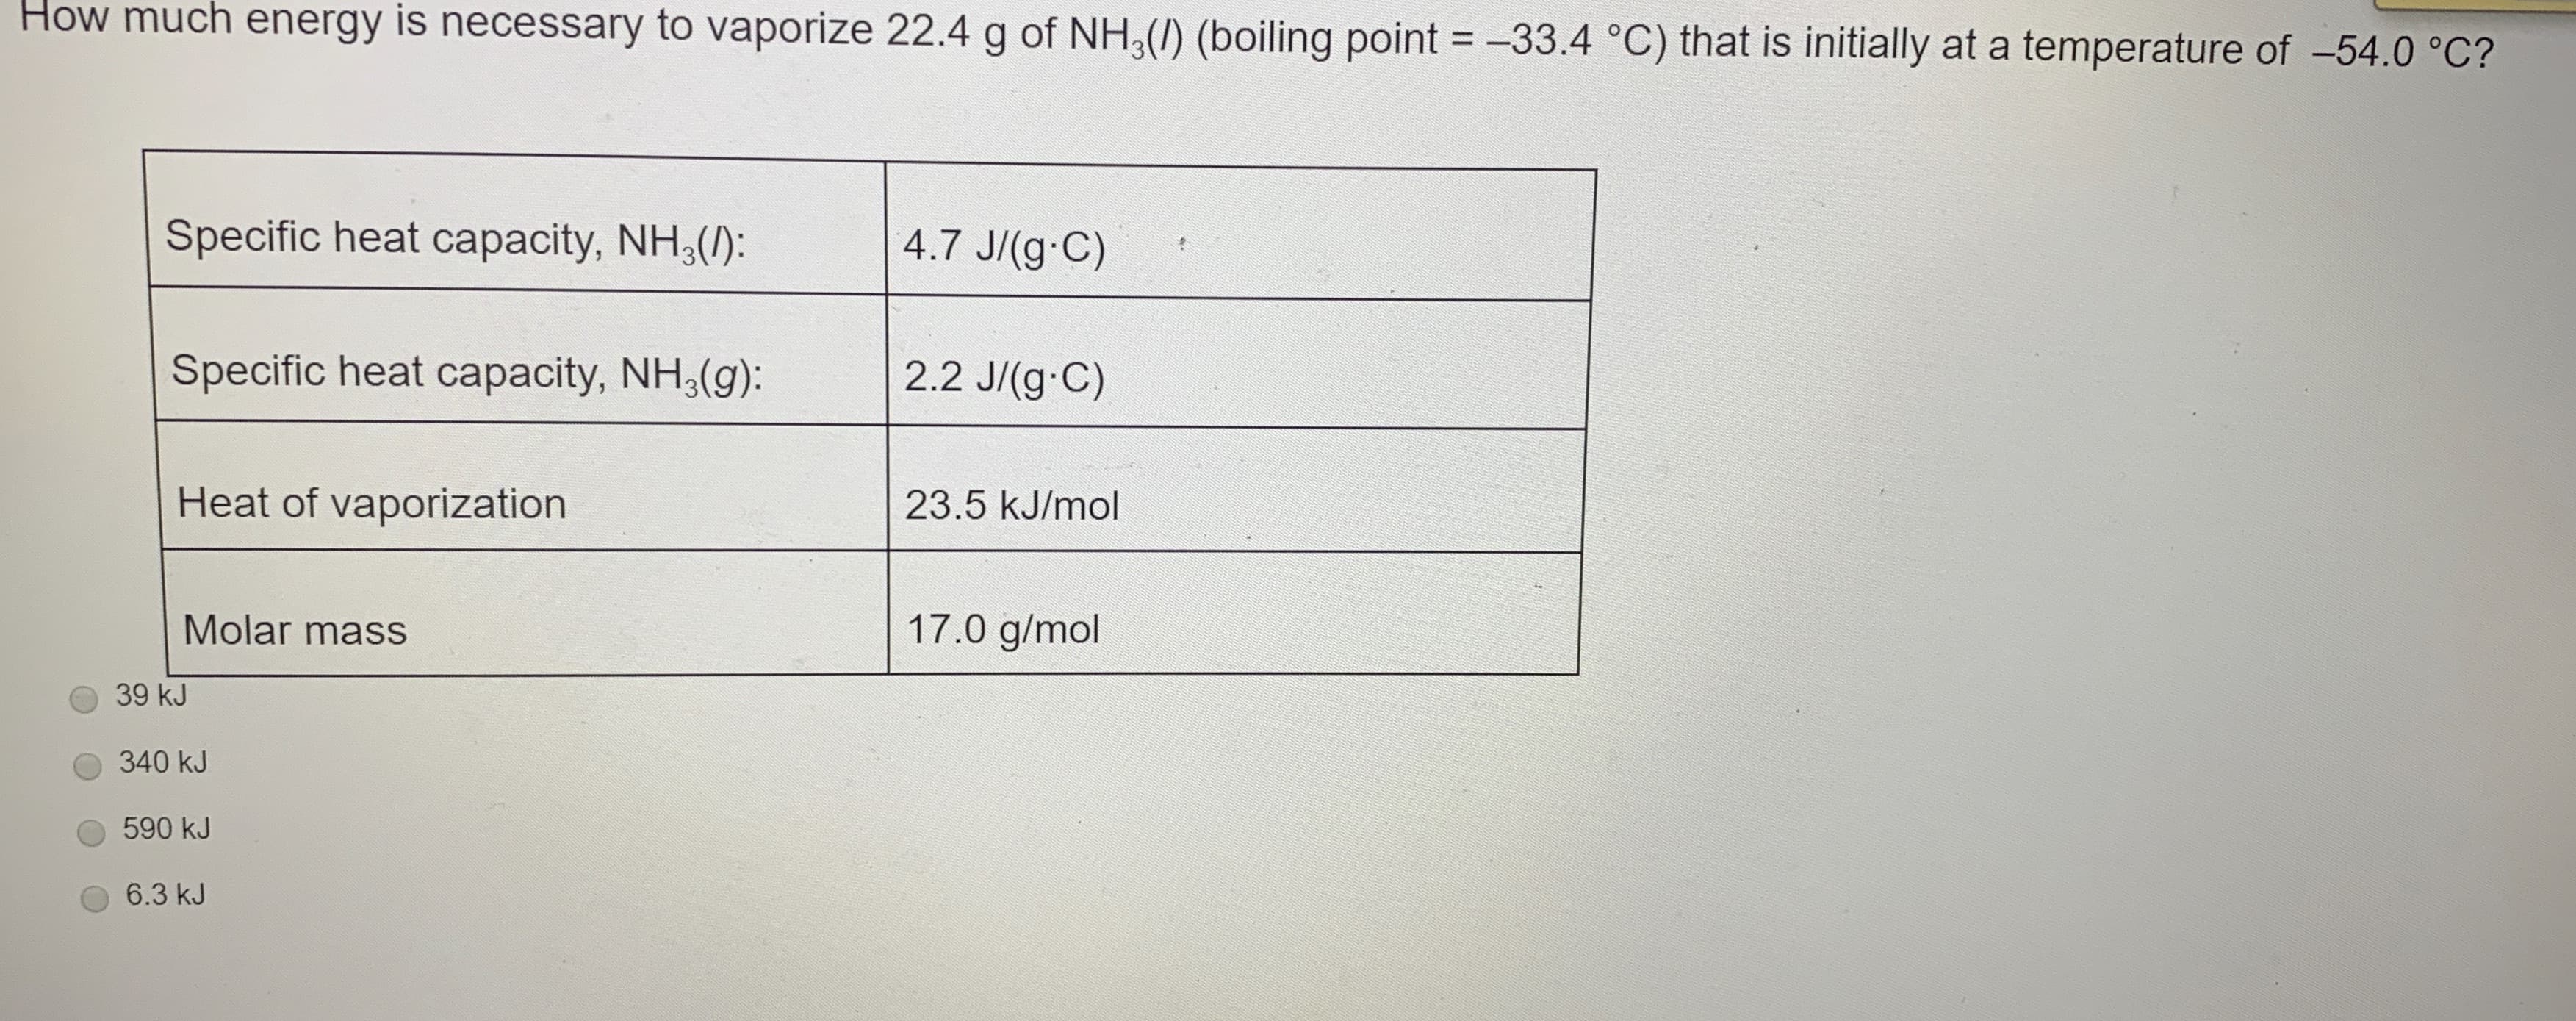 HOW much energy is necessary to vaporize 22.4 g of NH,(/) (boiling point = -33.4 °C) that is initially at a temperature of -54.0 °C?
Specific heat capacity, NH,(/):
4.7 J/(g C)
Specific heat capacity, NH,(g):
2.2 J/(g C)
Heat of vaporization
23.5 kJ/mol
Molar mass
17.0 g/mol
39 kJ
340 kJ
590 kJ
6.3 kJ
